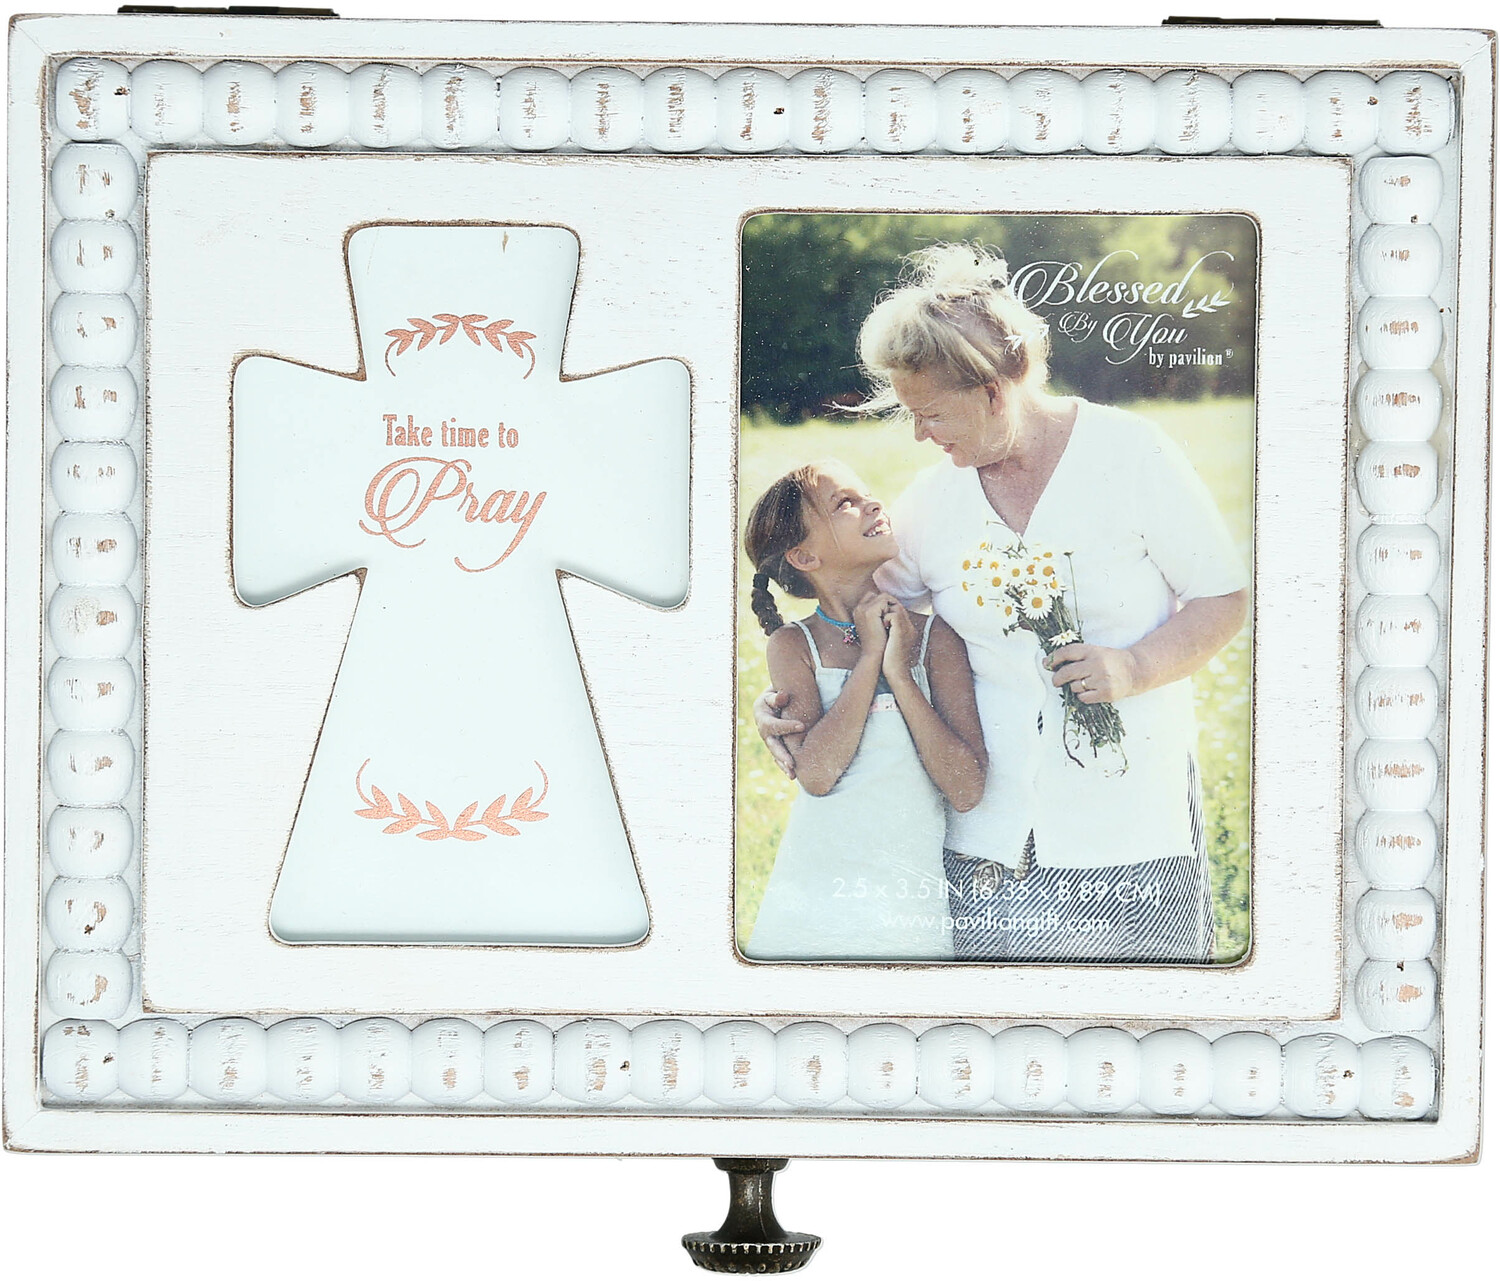 Pray by Blessed by You - Pray - 6.5" x 5" Prayer Box with Photo Frame
(Holds 2.25" x 3.25" Photo)